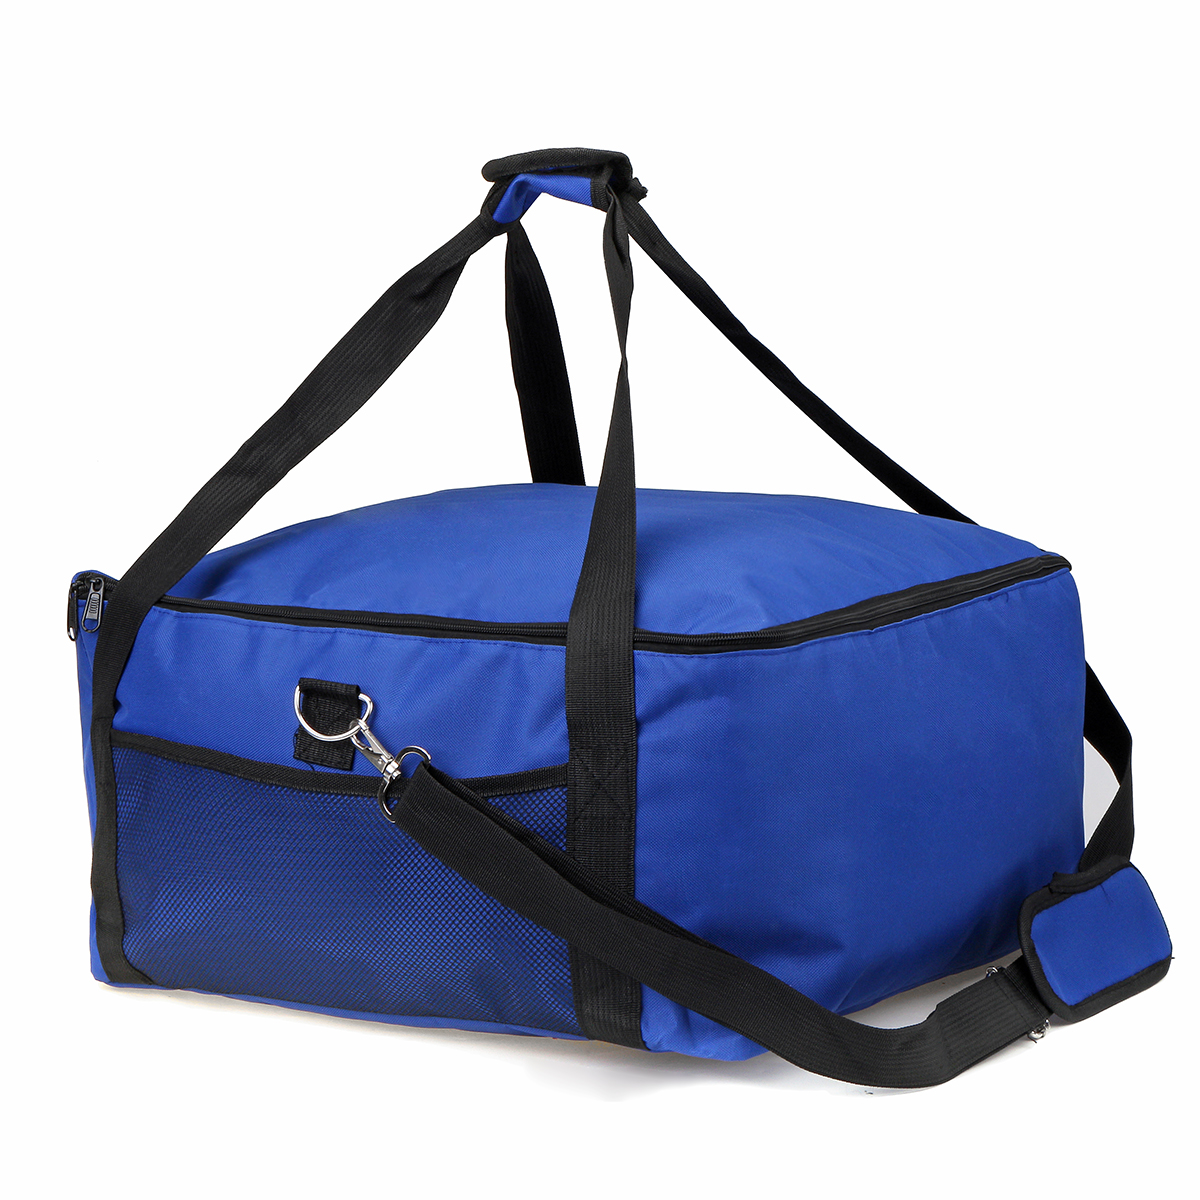 16inch-Camping-BBQ-Pizza-Delivery-Bag-Food-Insulated-Storage-Bag-Picnic-Bag-Lunch-Bag-1637130-2